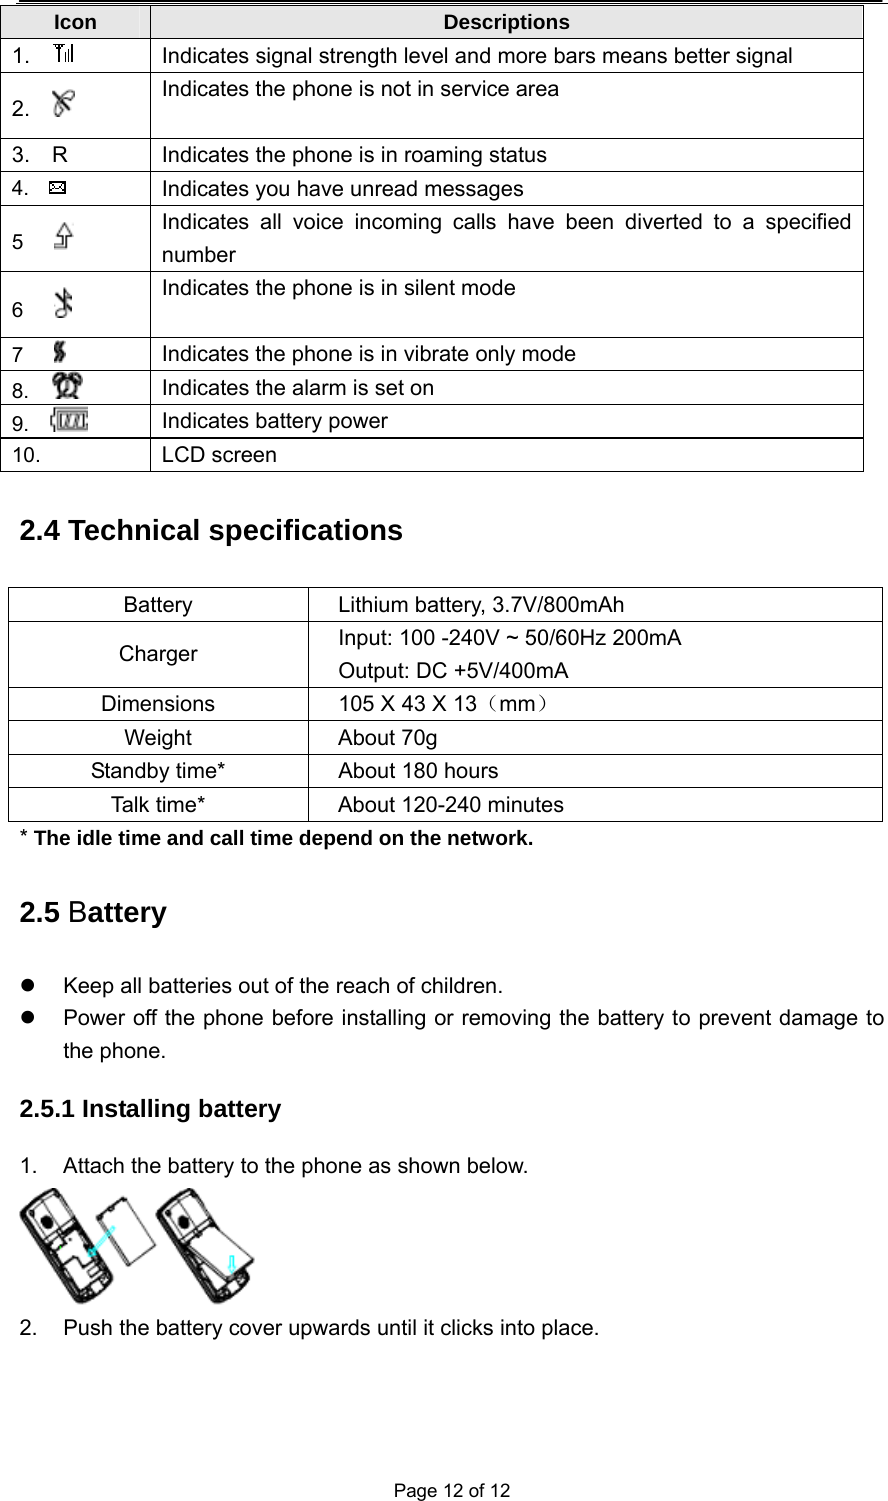  Page 12 of 12 2.4 Technical specifications Battery  Lithium battery, 3.7V/800mAh Charger  Input: 100 -240V ~ 50/60Hz 200mA Output: DC +5V/400mA  Dimensions  105 X 43 X 13（mm） Weight About 70g Standby time*  About 180 hours Talk time*  About 120-240 minutes * The idle time and call time depend on the network. 2.5 Battery   Keep all batteries out of the reach of children.   Power off the phone before installing or removing the battery to prevent damage to the phone. 2.5.1 Installing battery 1.  Attach the battery to the phone as shown below.  2.  Push the battery cover upwards until it clicks into place. Icon  Descriptions 1.     Indicates signal strength level and more bars means better signal 2.    Indicates the phone is not in service area 3.    R  Indicates the phone is in roaming status 4.    Indicates you have unread messages 5     Indicates all voice incoming calls have been diverted to a specified number 6     Indicates the phone is in silent mode   7     Indicates the phone is in vibrate only mode 8.    Indicates the alarm is set on 9.    Indicates battery power   10.   LCD screen 